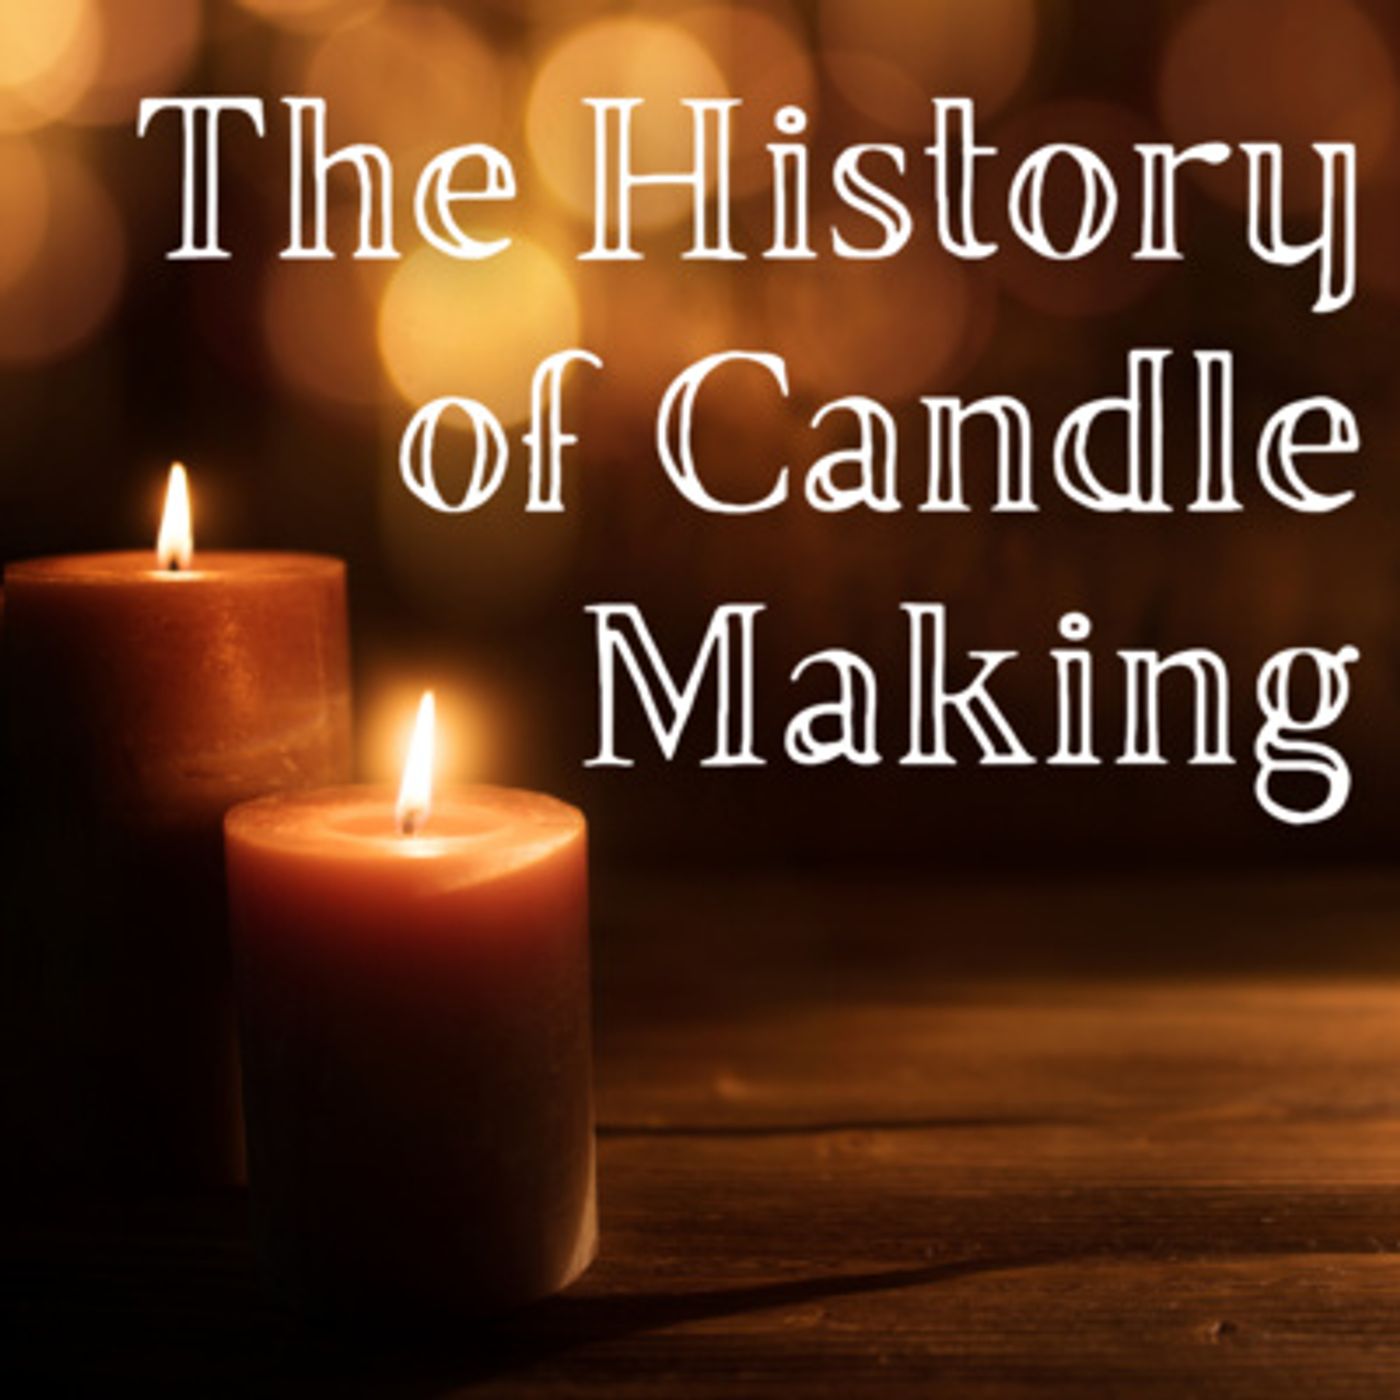 The History of Candle Making